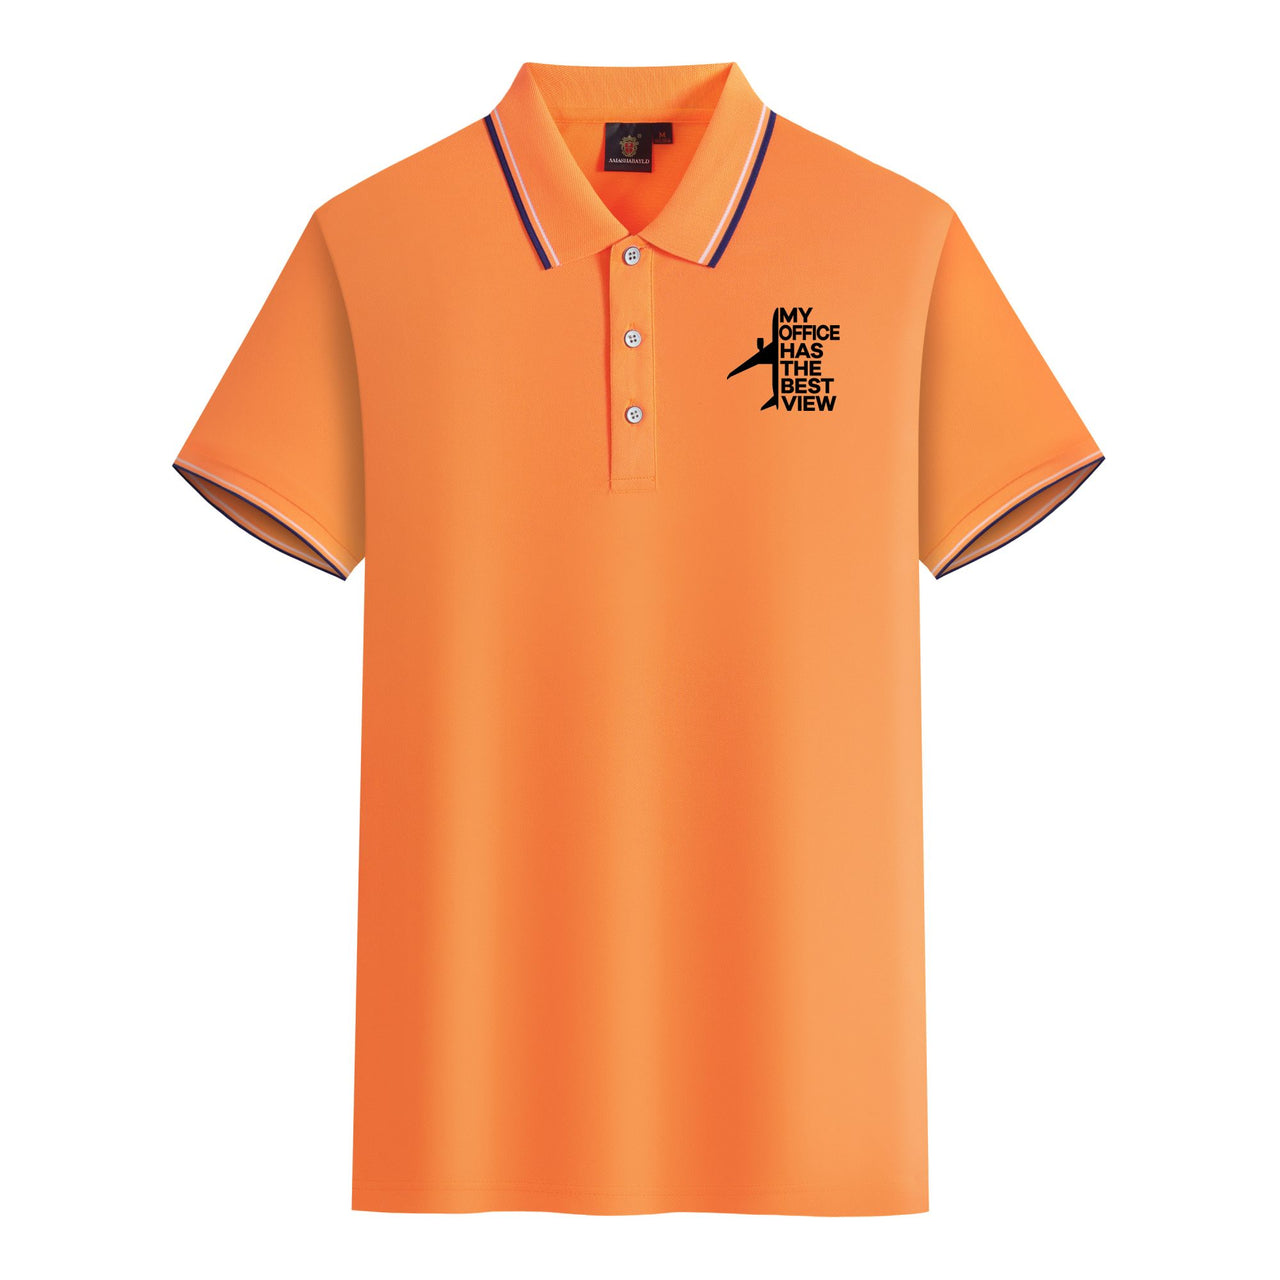 My Office Has The Best View Designed Stylish Polo T-Shirts